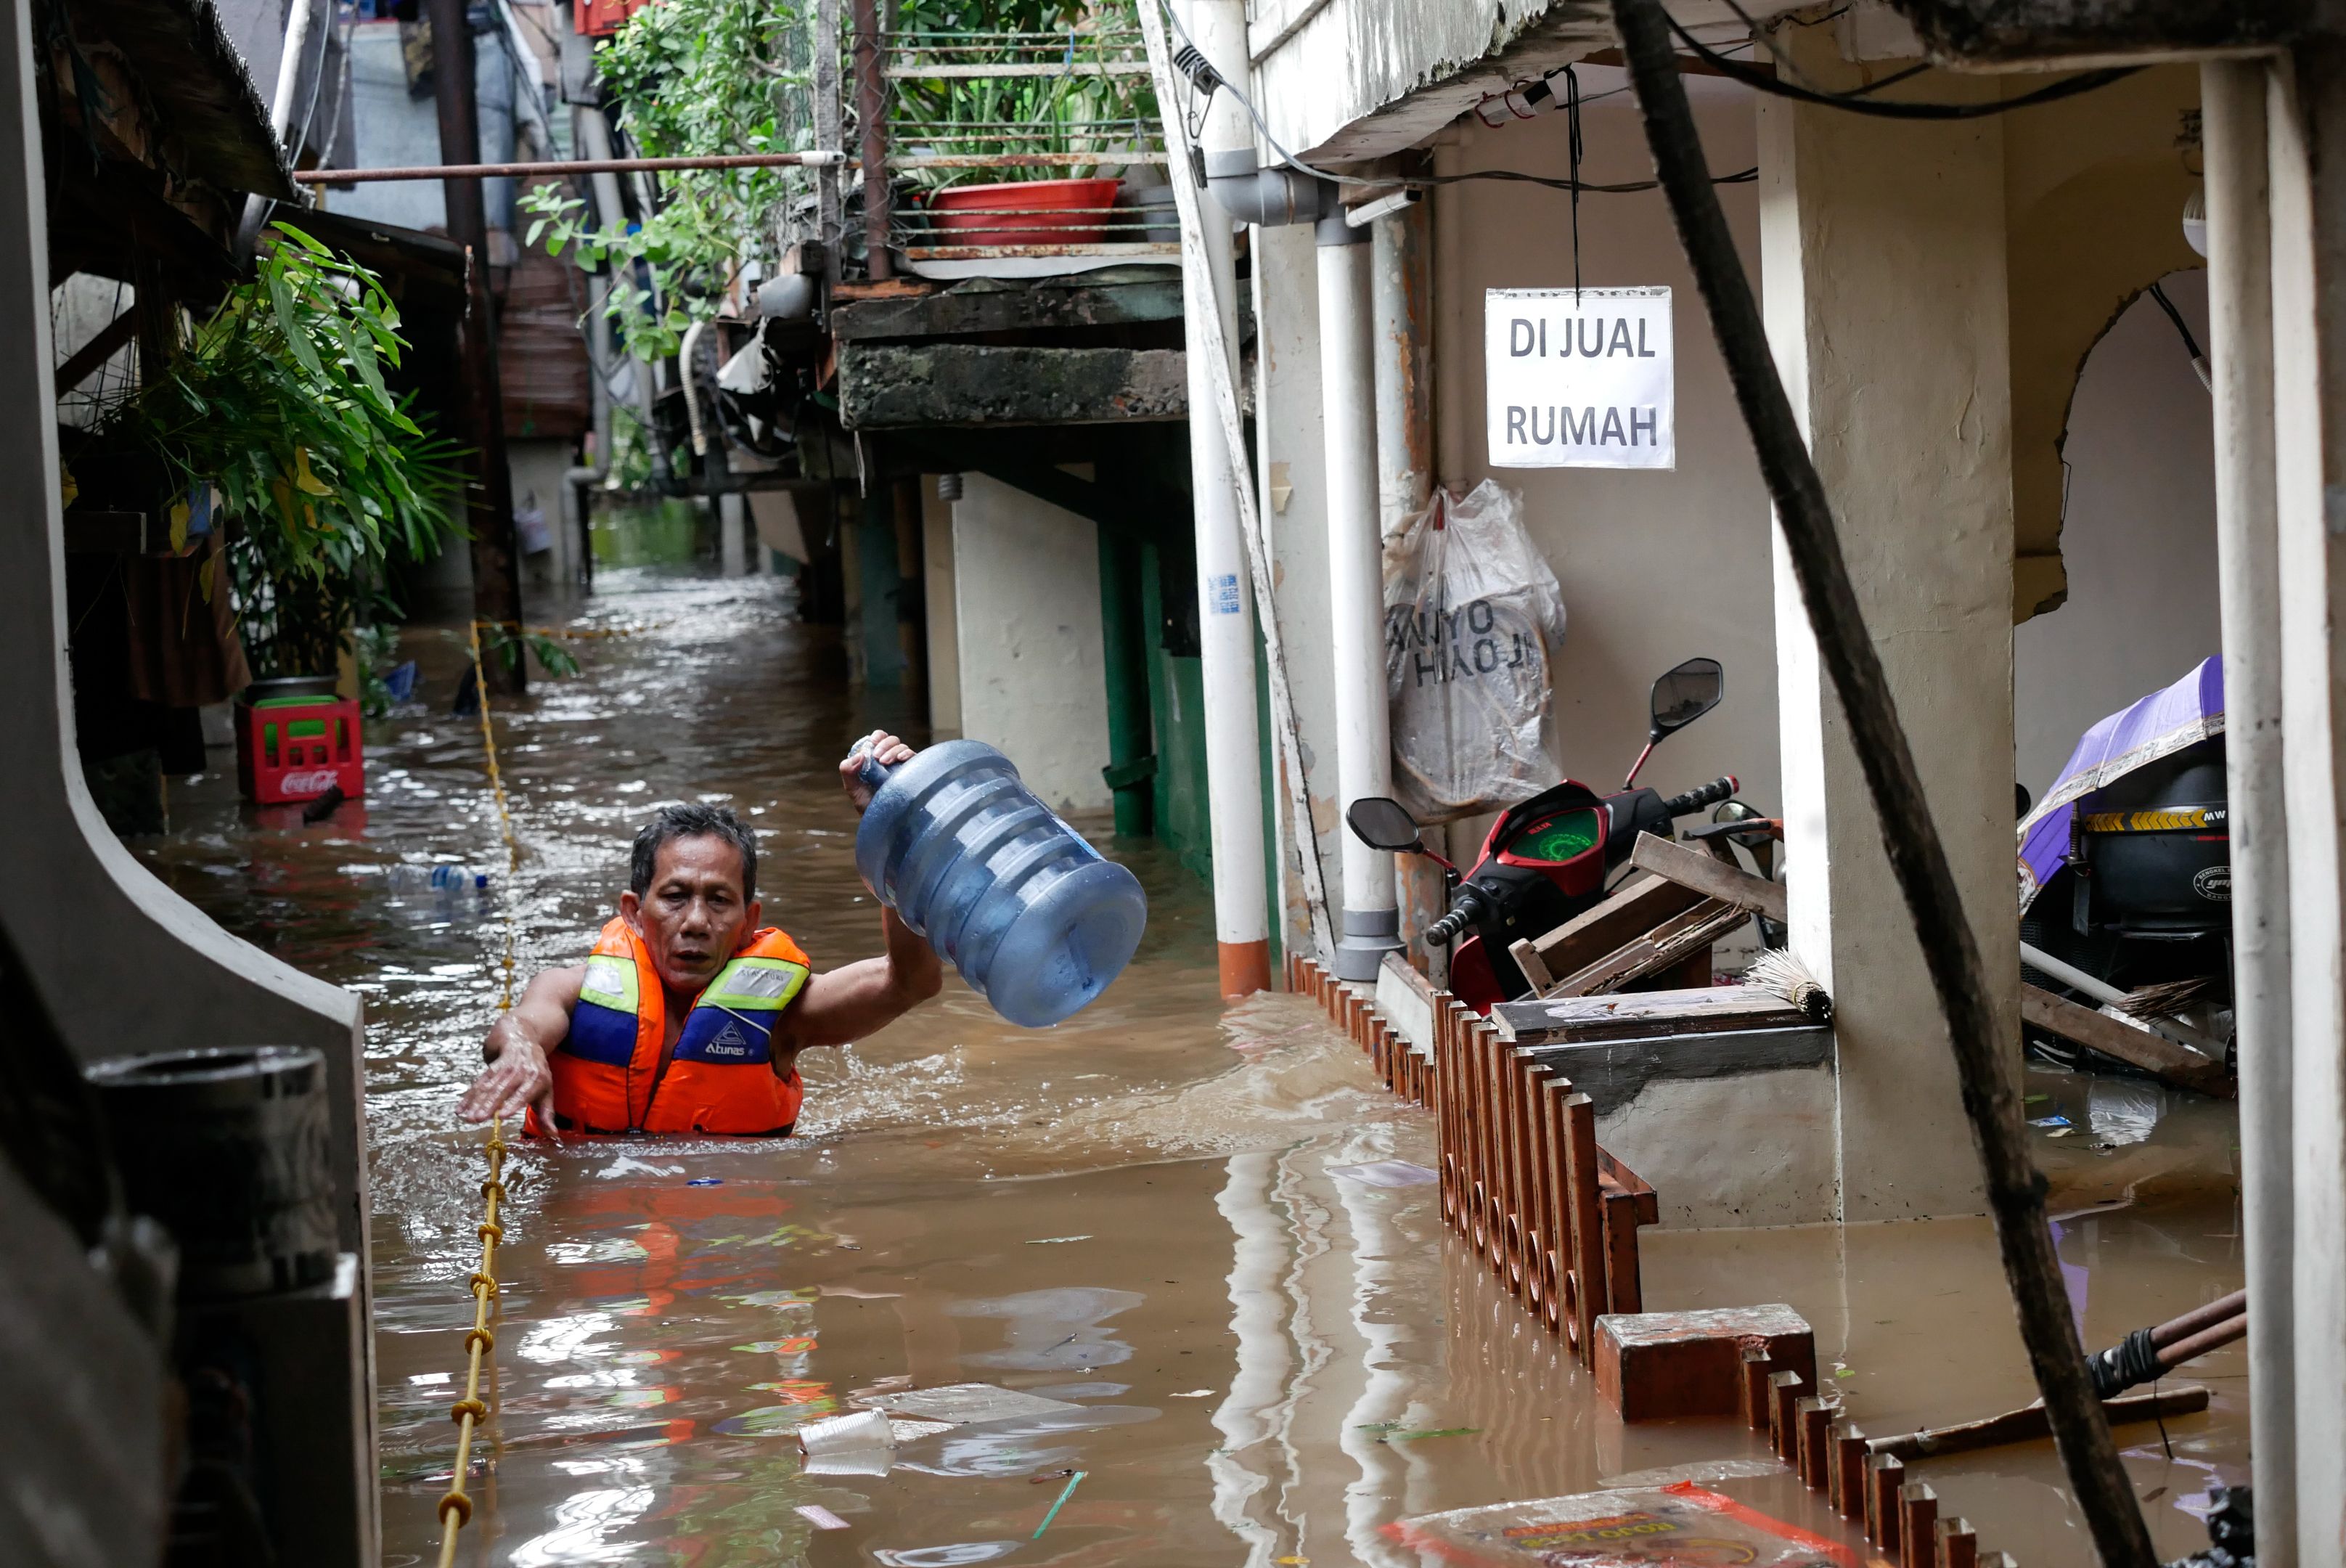 A resident walks in a flooded area following heavy rains at Kemang in Jakarta, Indonesia 